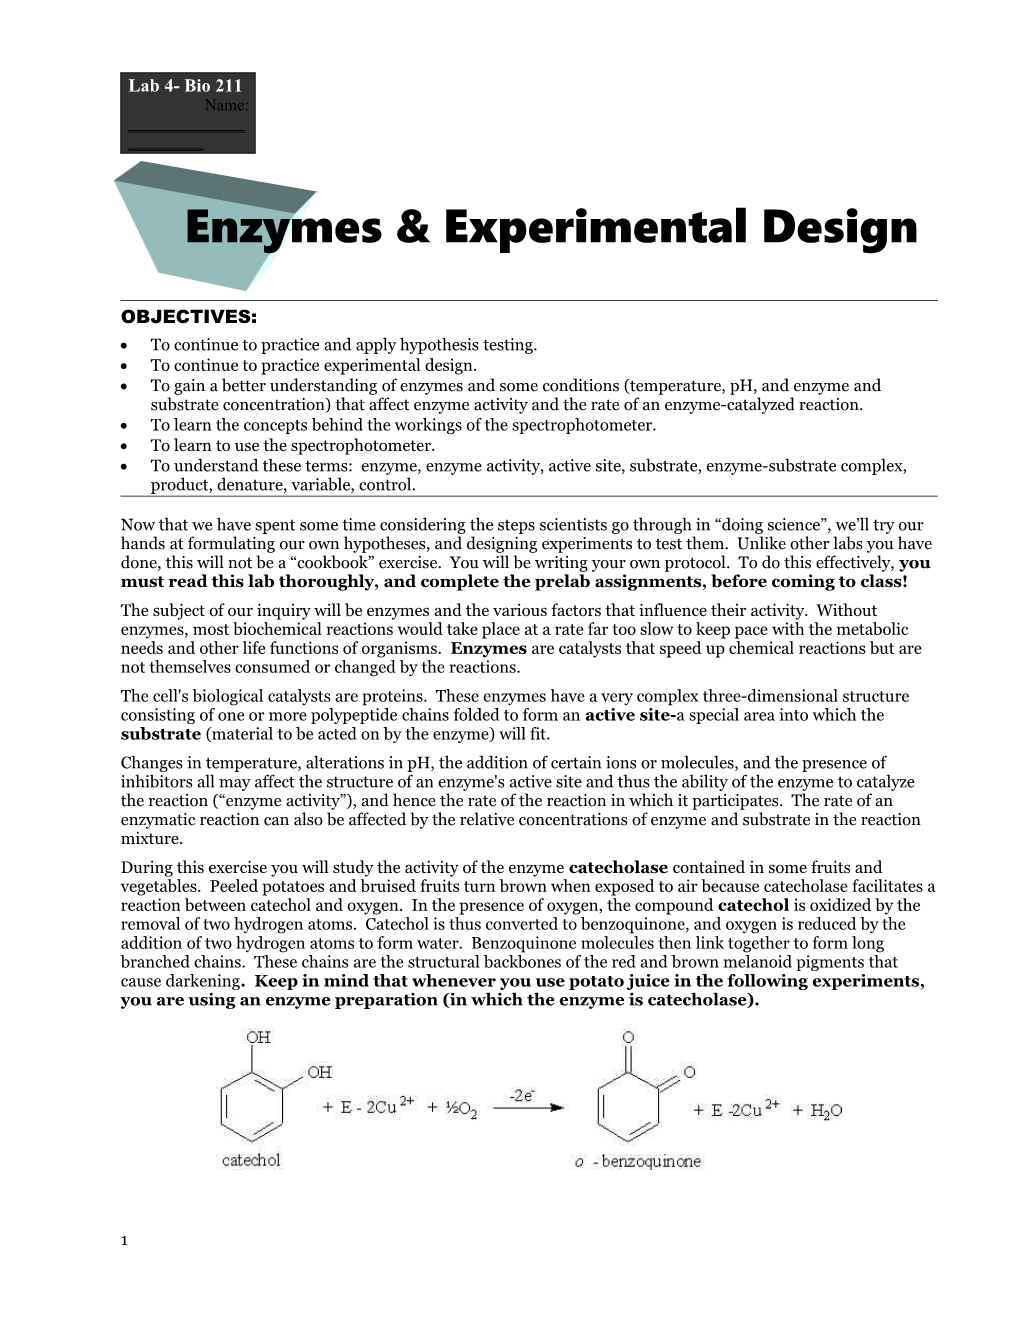 Enzymes & Experimental Design